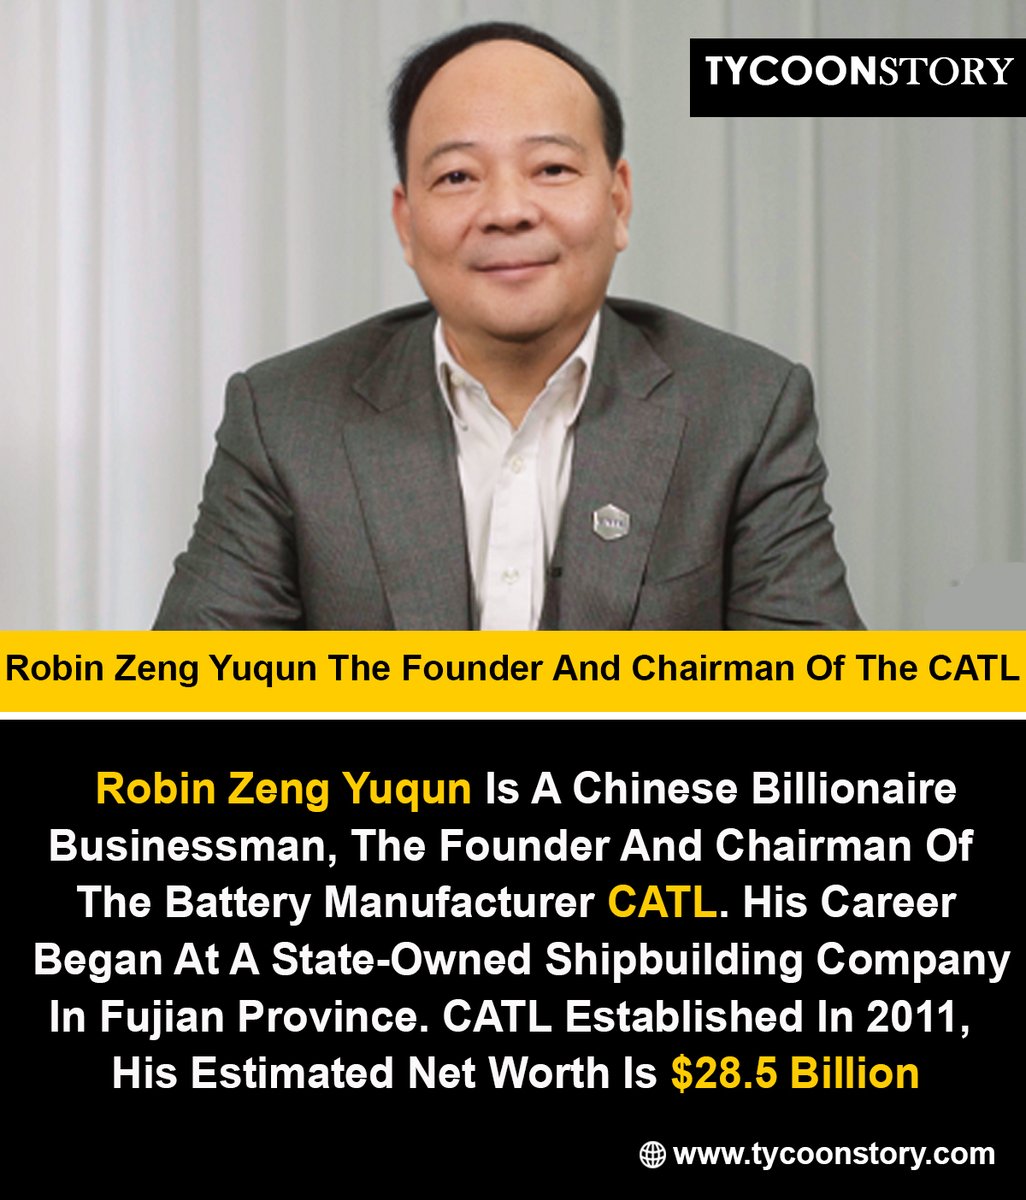 Robin Zeng Yuqun The Founder And Chairman Of The CATL #RobinZengYuqun #CATL #Founder #Chairman #BatteryTechnology #Innovation #RenewableEnergy #ElectricVehicles #GlobalLeadership #EnergyStorage #CleanEnergy #GreenTechnology @catl_official tycoonstory.com